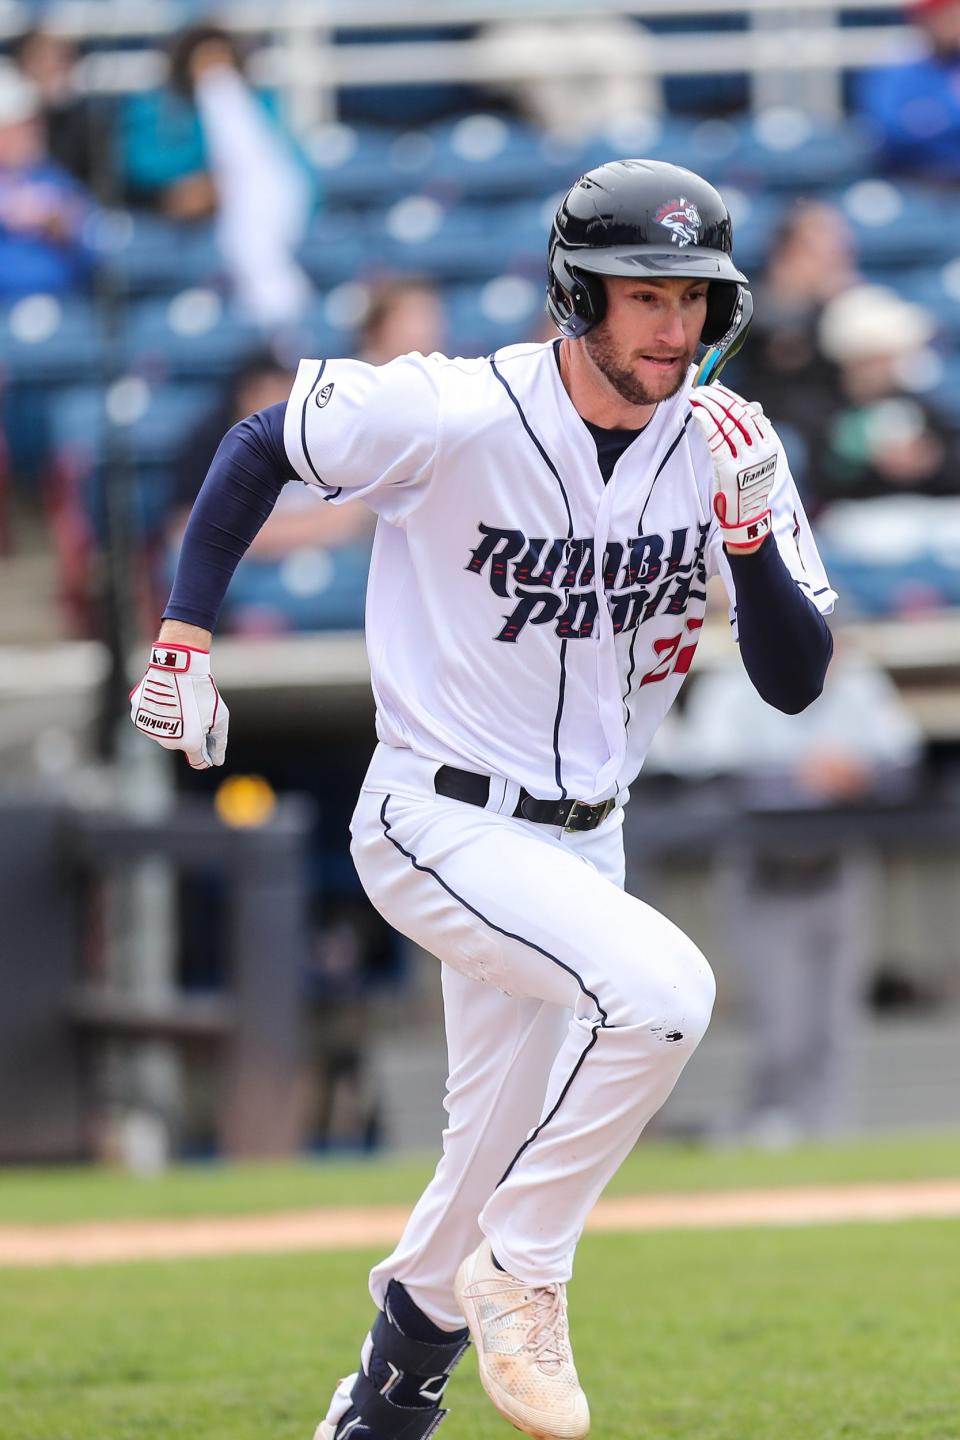 Justin Verlander pitched 4⅔ scoreless innings of two-hit, six-strikeout ball in a 6-1 win for the Binghamton Rumble Ponies over the Akron Rubber Ducks on Friday, April 28, 2023.